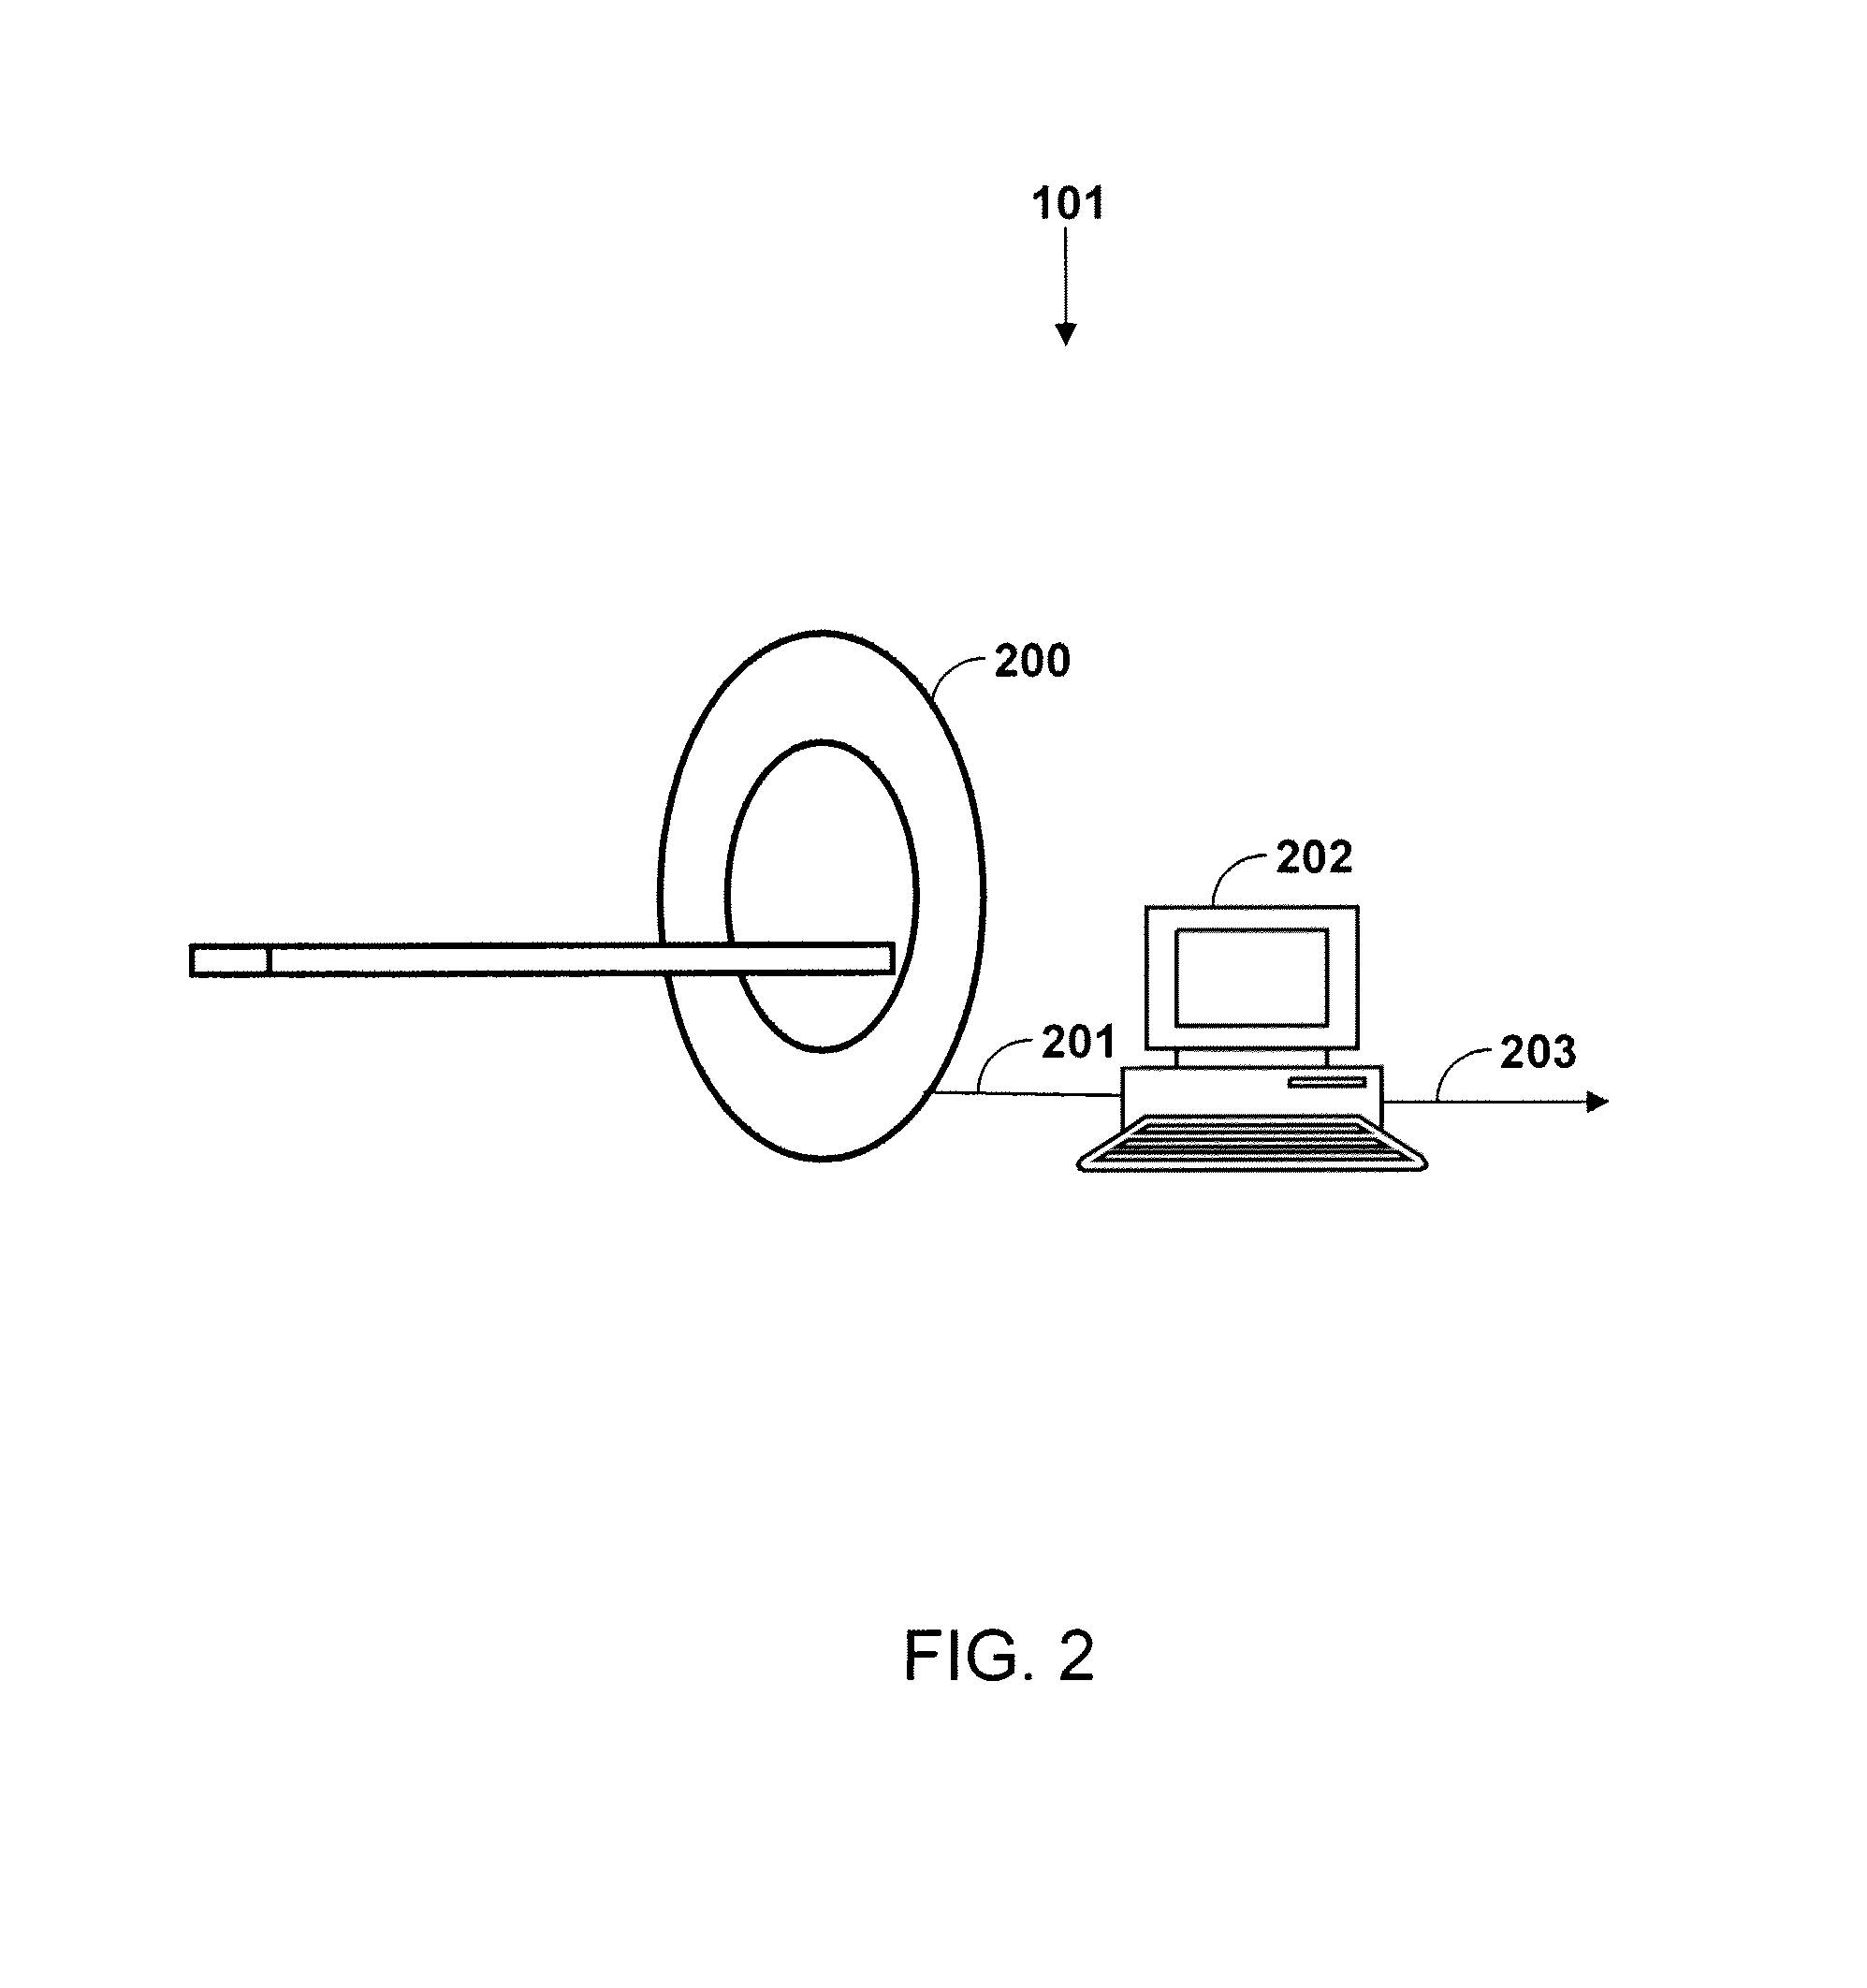 Distributed microwave image processing system